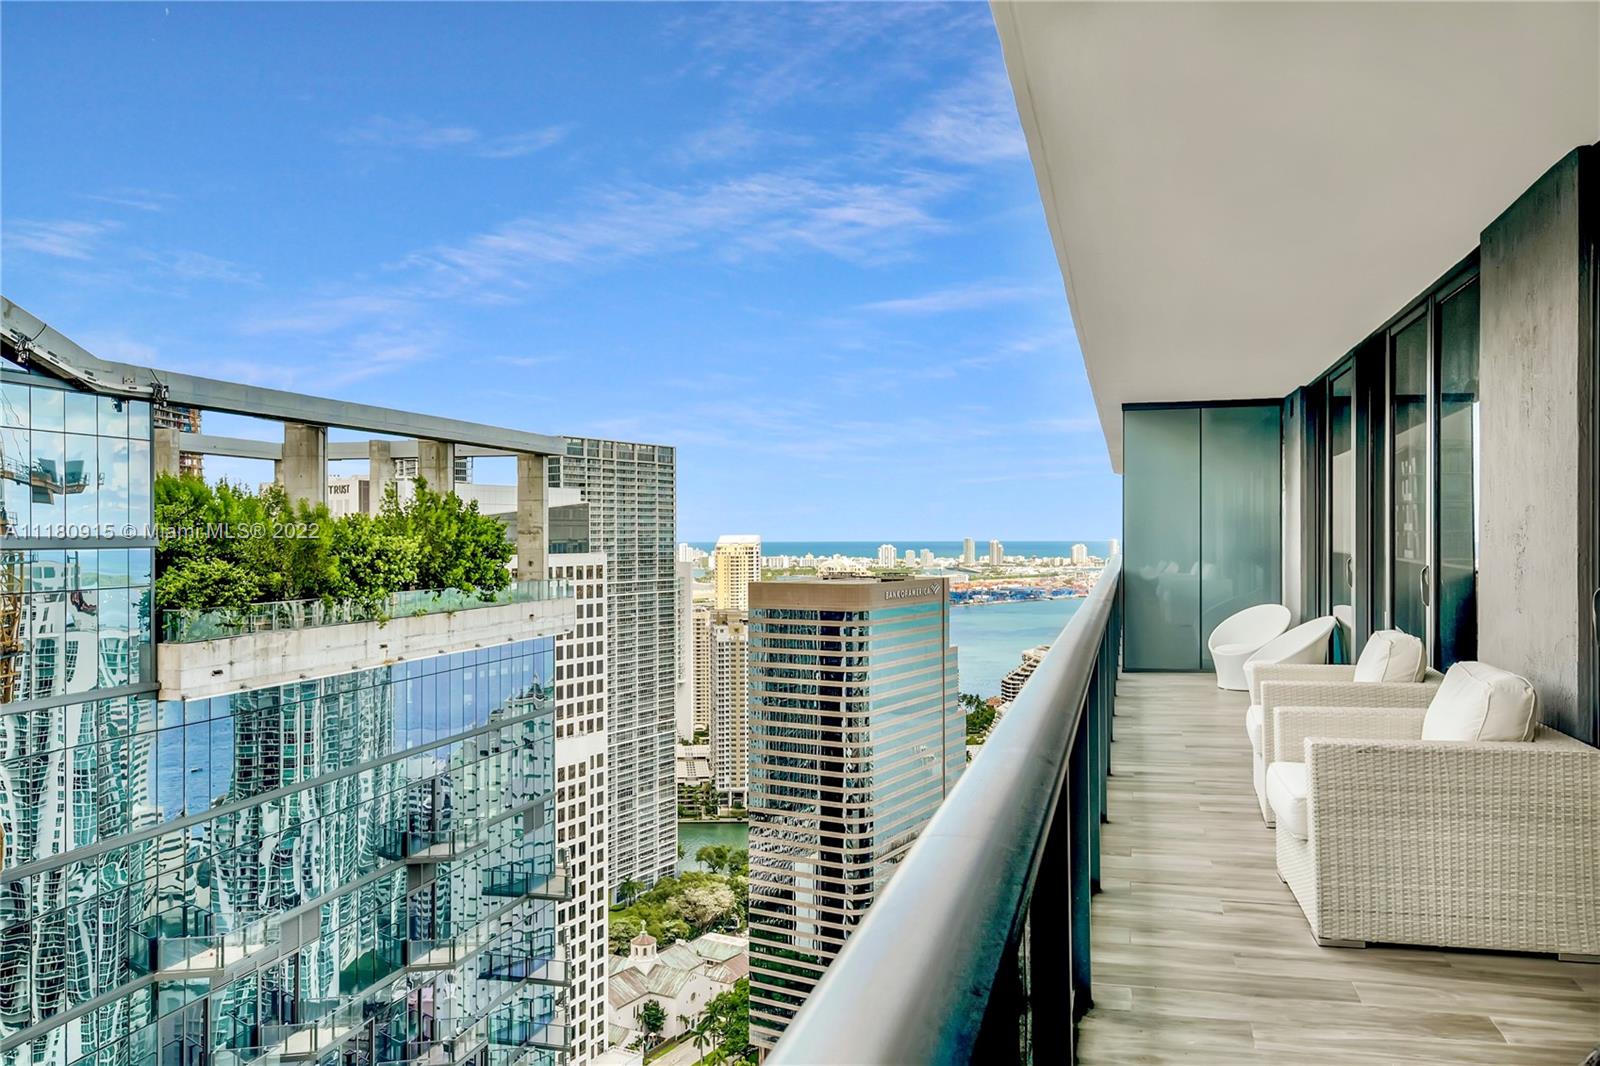 Huge, 2,274 sq. ft. Luxury Apartment, comprised of two (2) apartments put together, with over 300 sq. ft. of private terrace featuring views all the way to Miami Beach, and amazing views of Brickell and the Miami River, from the 47th-floor! Large, gourmet kitchen by Italkraft with top-of-the-line appliances by Wolf & Sub-Zero, to accompany 2-bedrooms + 4 full baths! Marble Countertops, touch-screen controls, huge Master bath, and being sold furnished! Enjoy the 57th-floor rooftop pool + separate 112 ft. beach-entry rooftop pool, Jacuzzi, state-of-the-art gym + spa, tennis courts, and more! Just steps to Biscayne Bay and only minutes to the beach, and located in the heart of Brickell, walking distance to the best restaurants, bars, rooftops, and shopping in Miami!